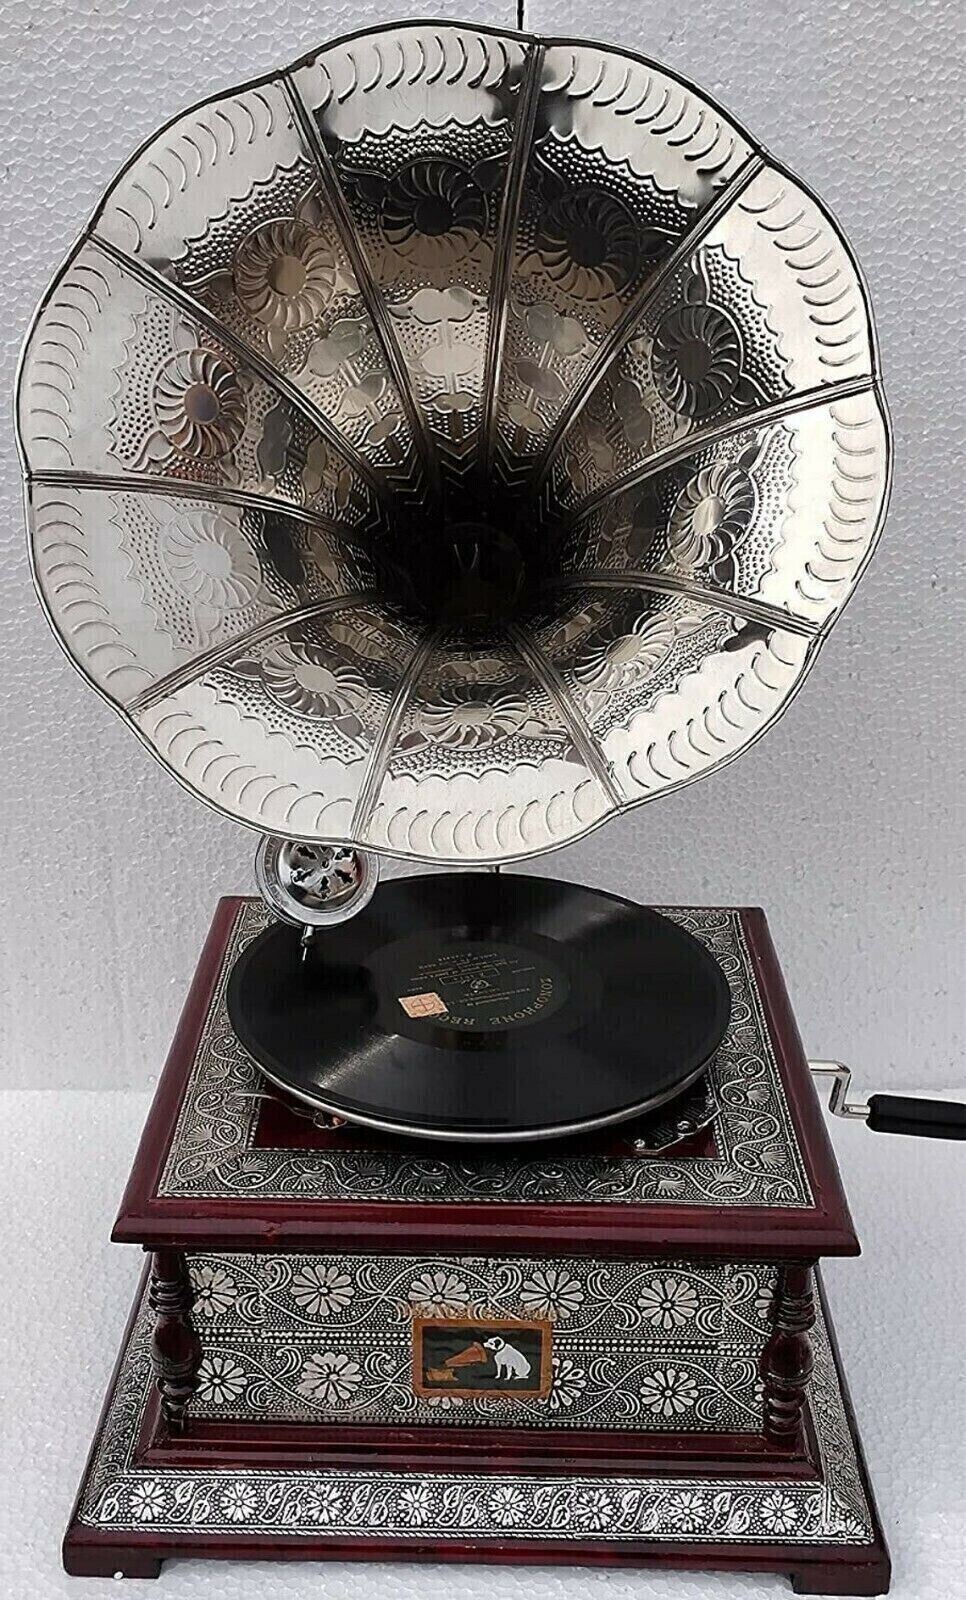 HMV Antique look Gramophone Fully Working ,Antique Design Phonograph win-up reco